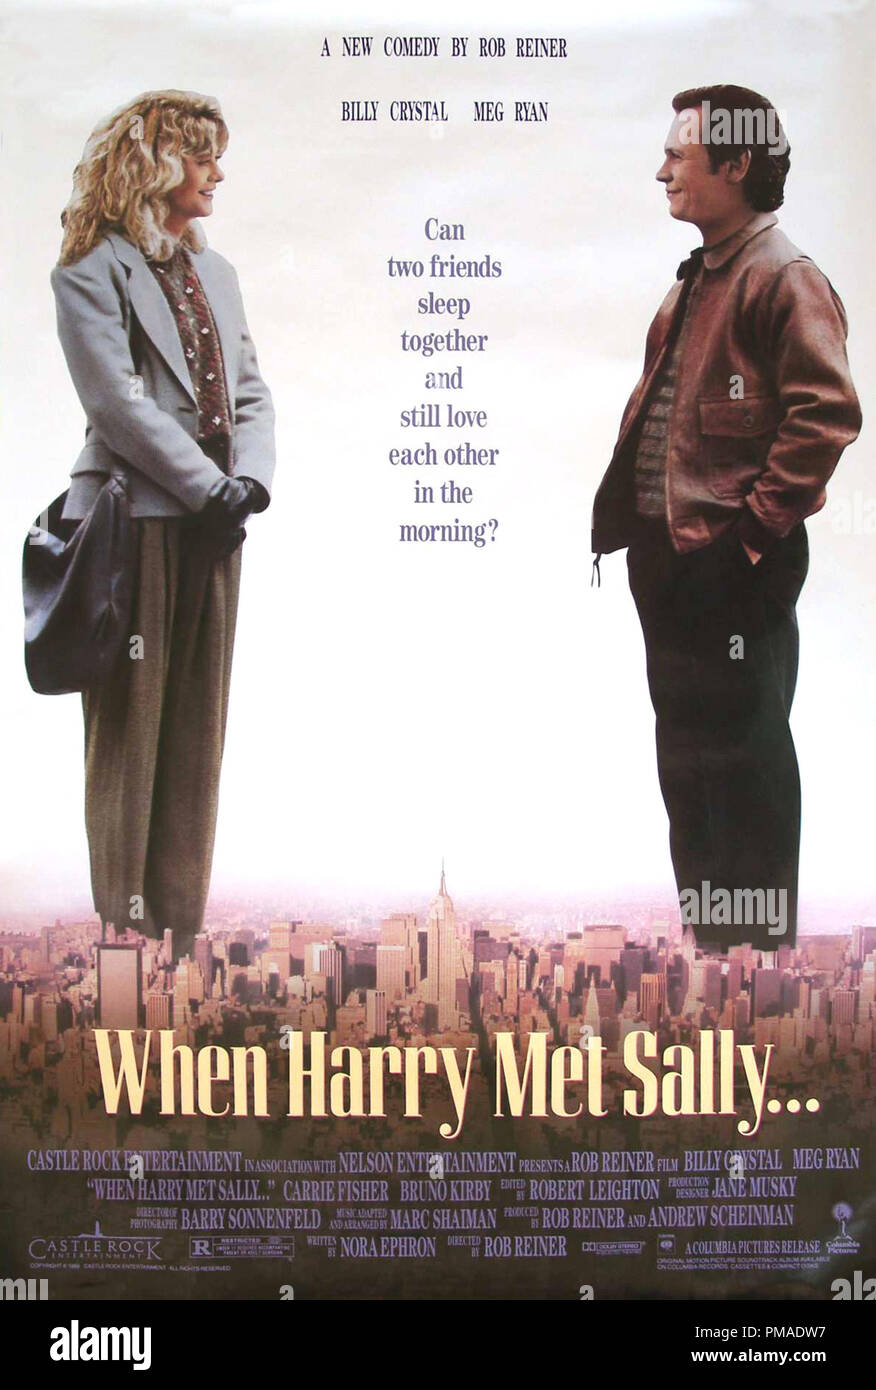 "When Harry Met Sally..." - US Poster 1989 Columbia Pictures  Billy Crystal, Meg Ryan  File Reference # 32509_382THA Stock Photo